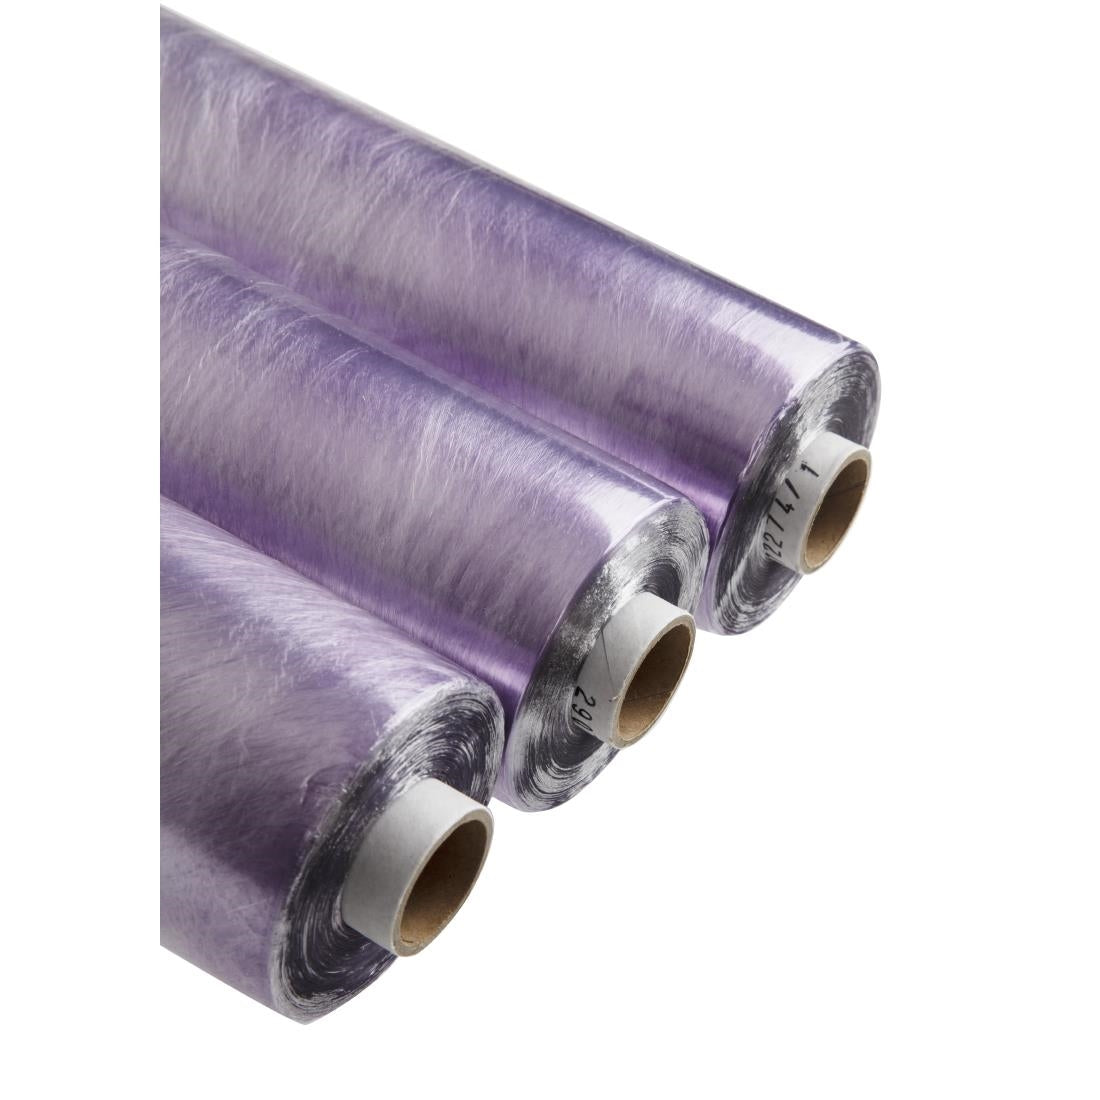 GD149 Pre-Perforated Cling Film 450mm x 500m (Pack of 3) JD Catering Equipment Solutions Ltd